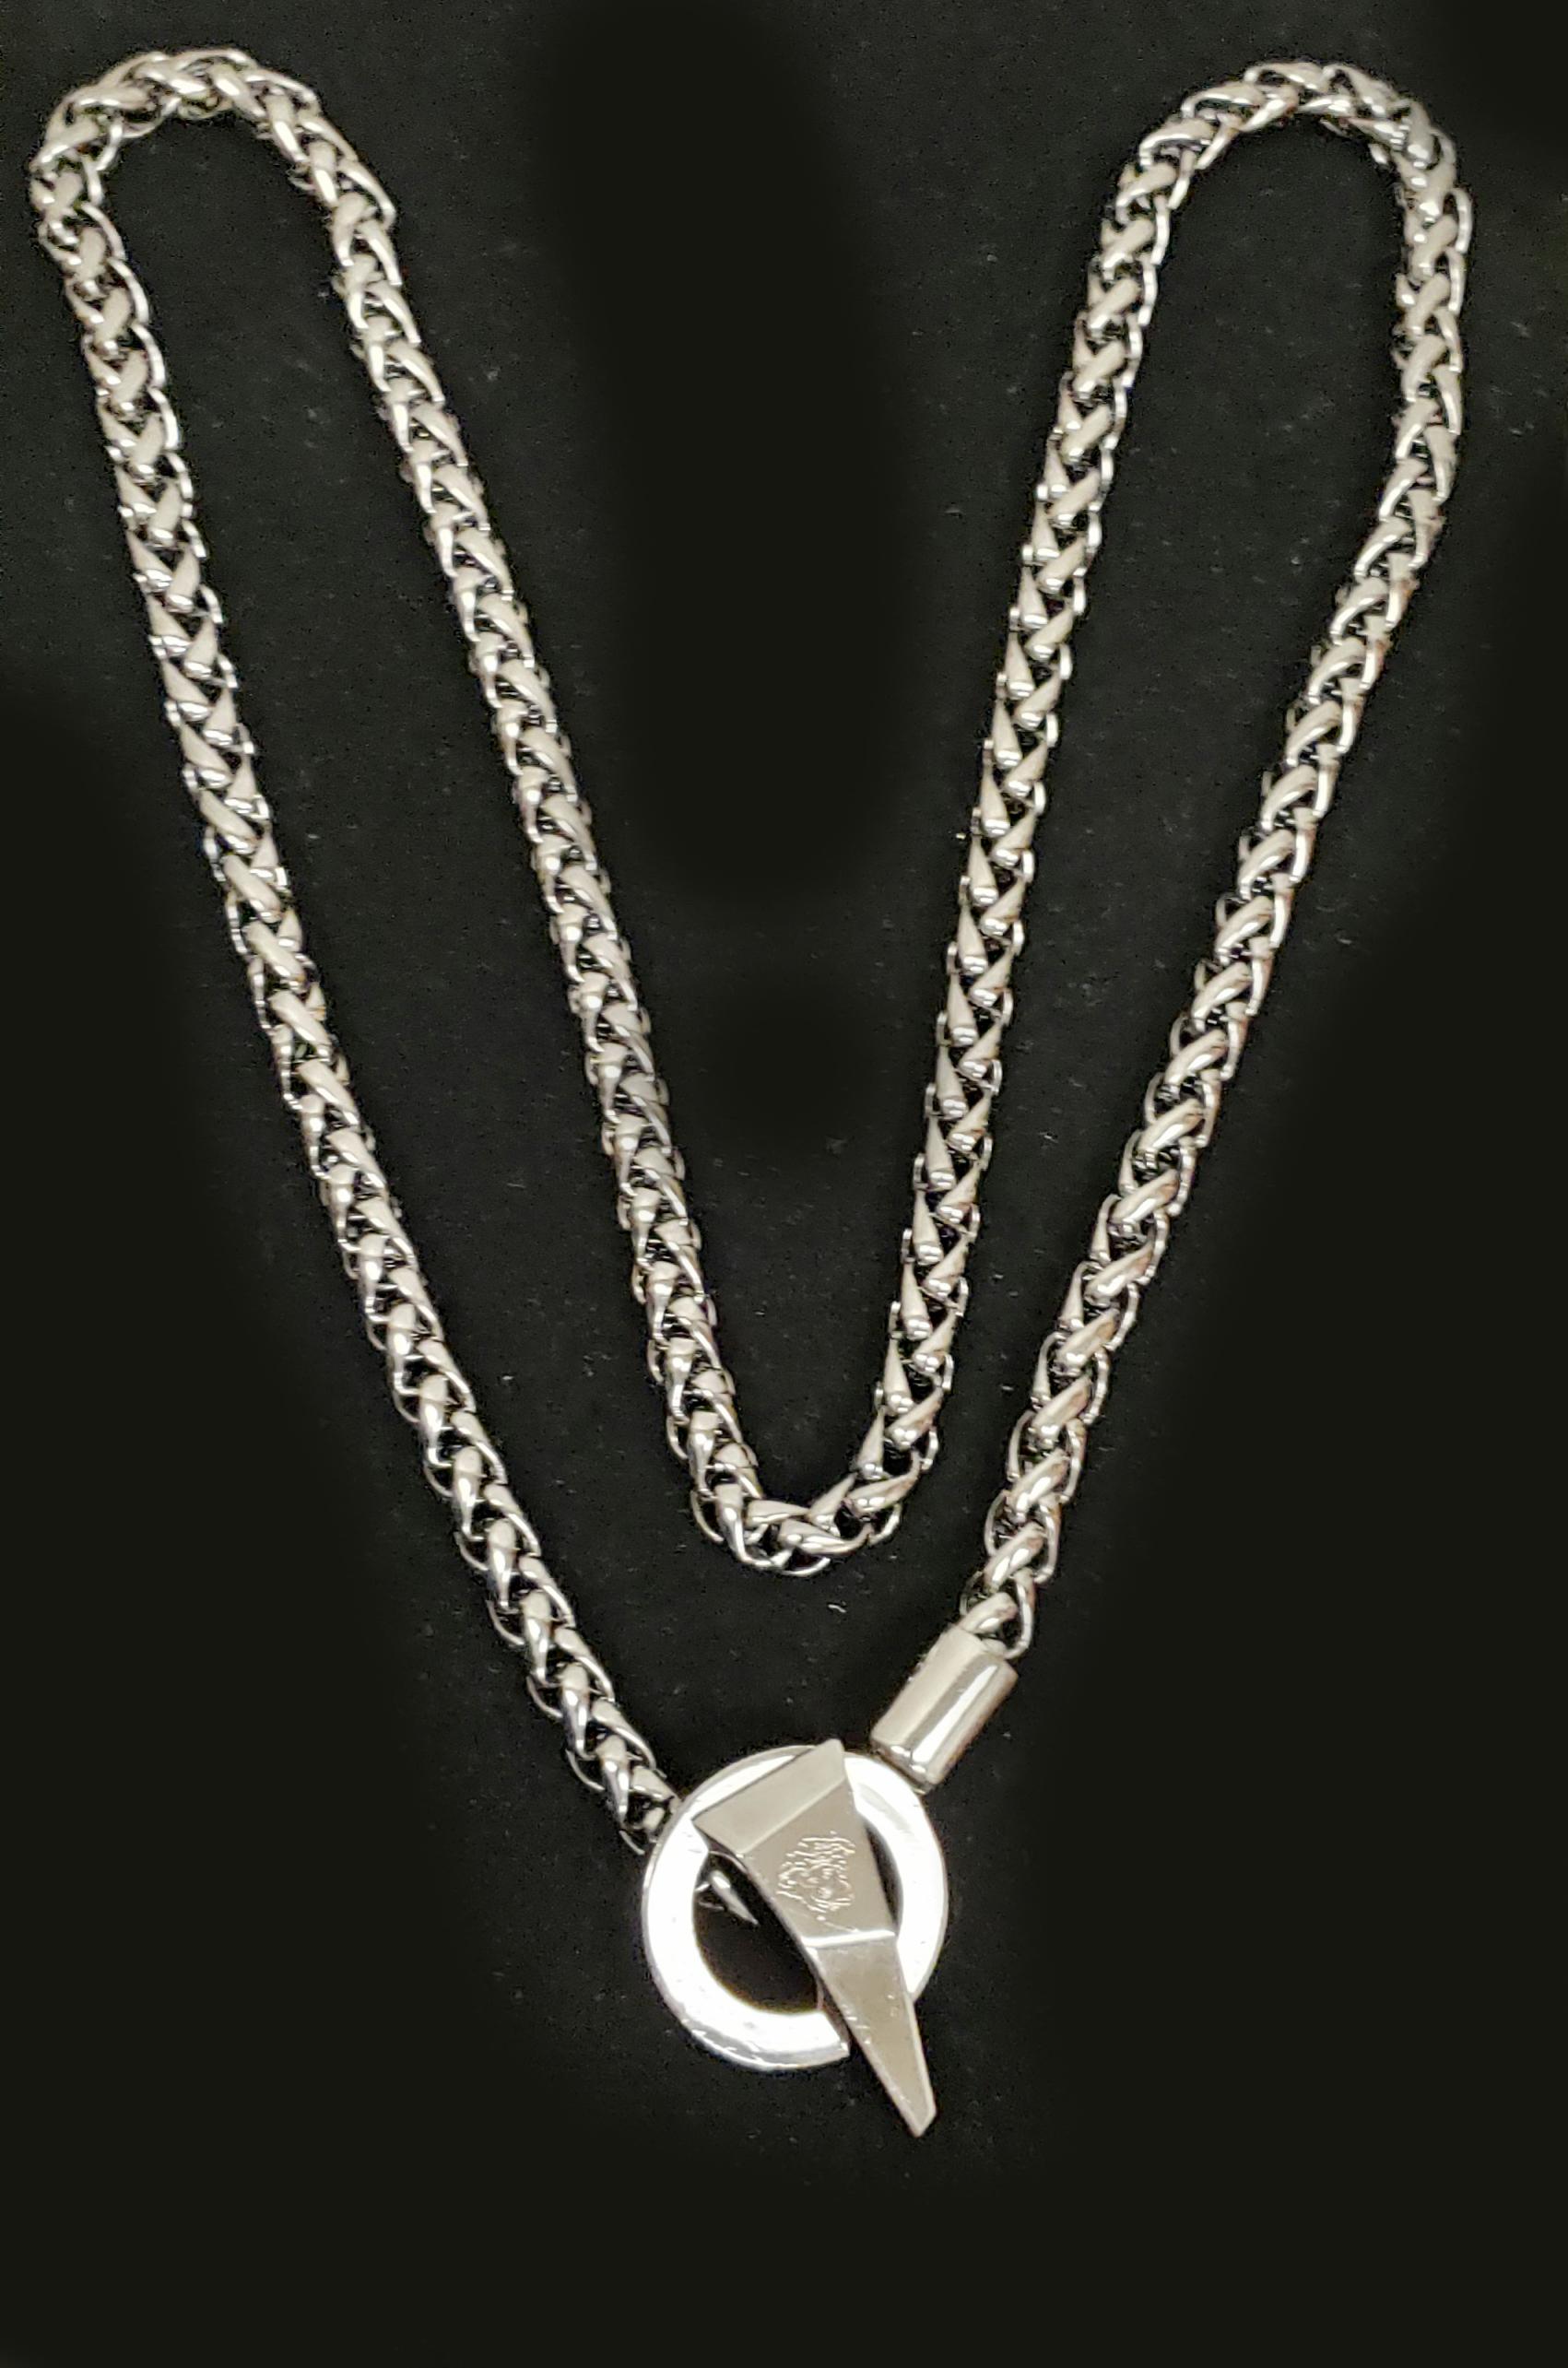 Spring 2011 L# 16 NEW VERSACE SILVER TONE METAL CHAIN For Sale 2